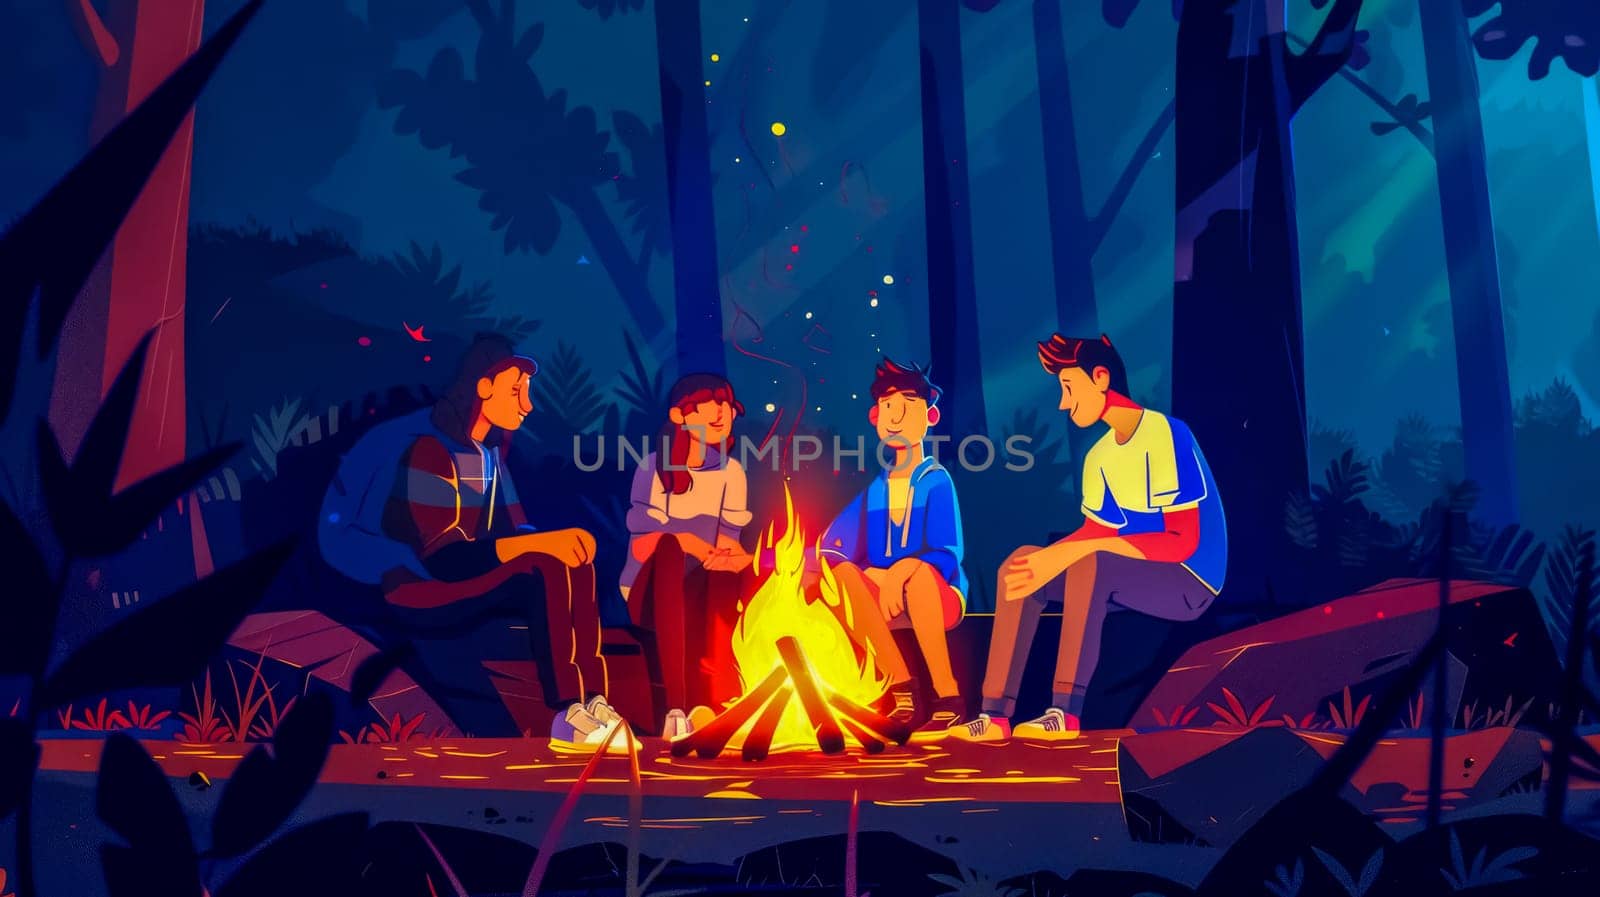 Friends enjoying campfire in forest at night by Edophoto